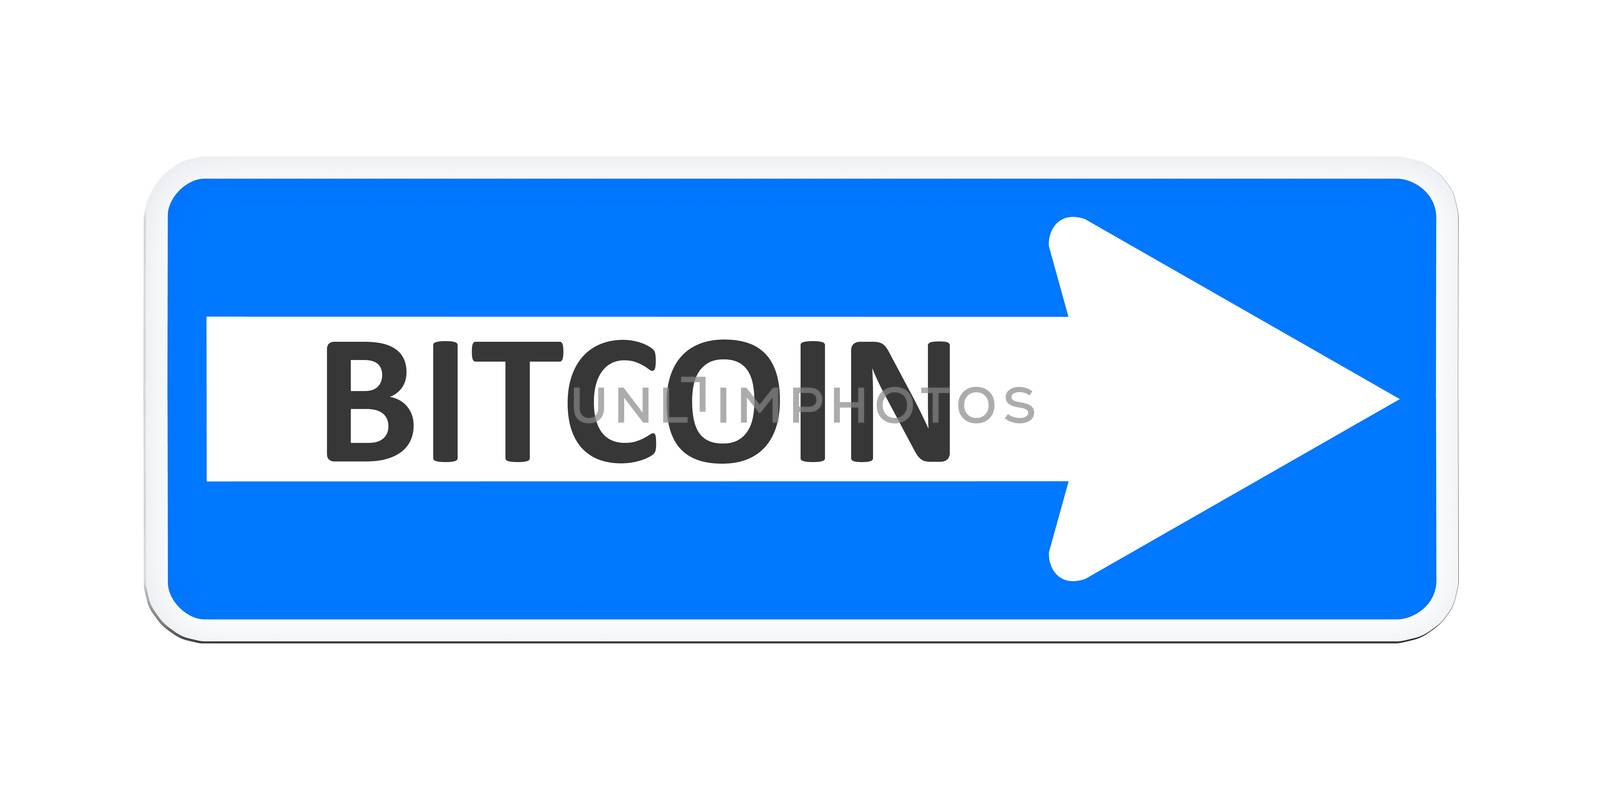 german one way sign with the word bitcoin by magann